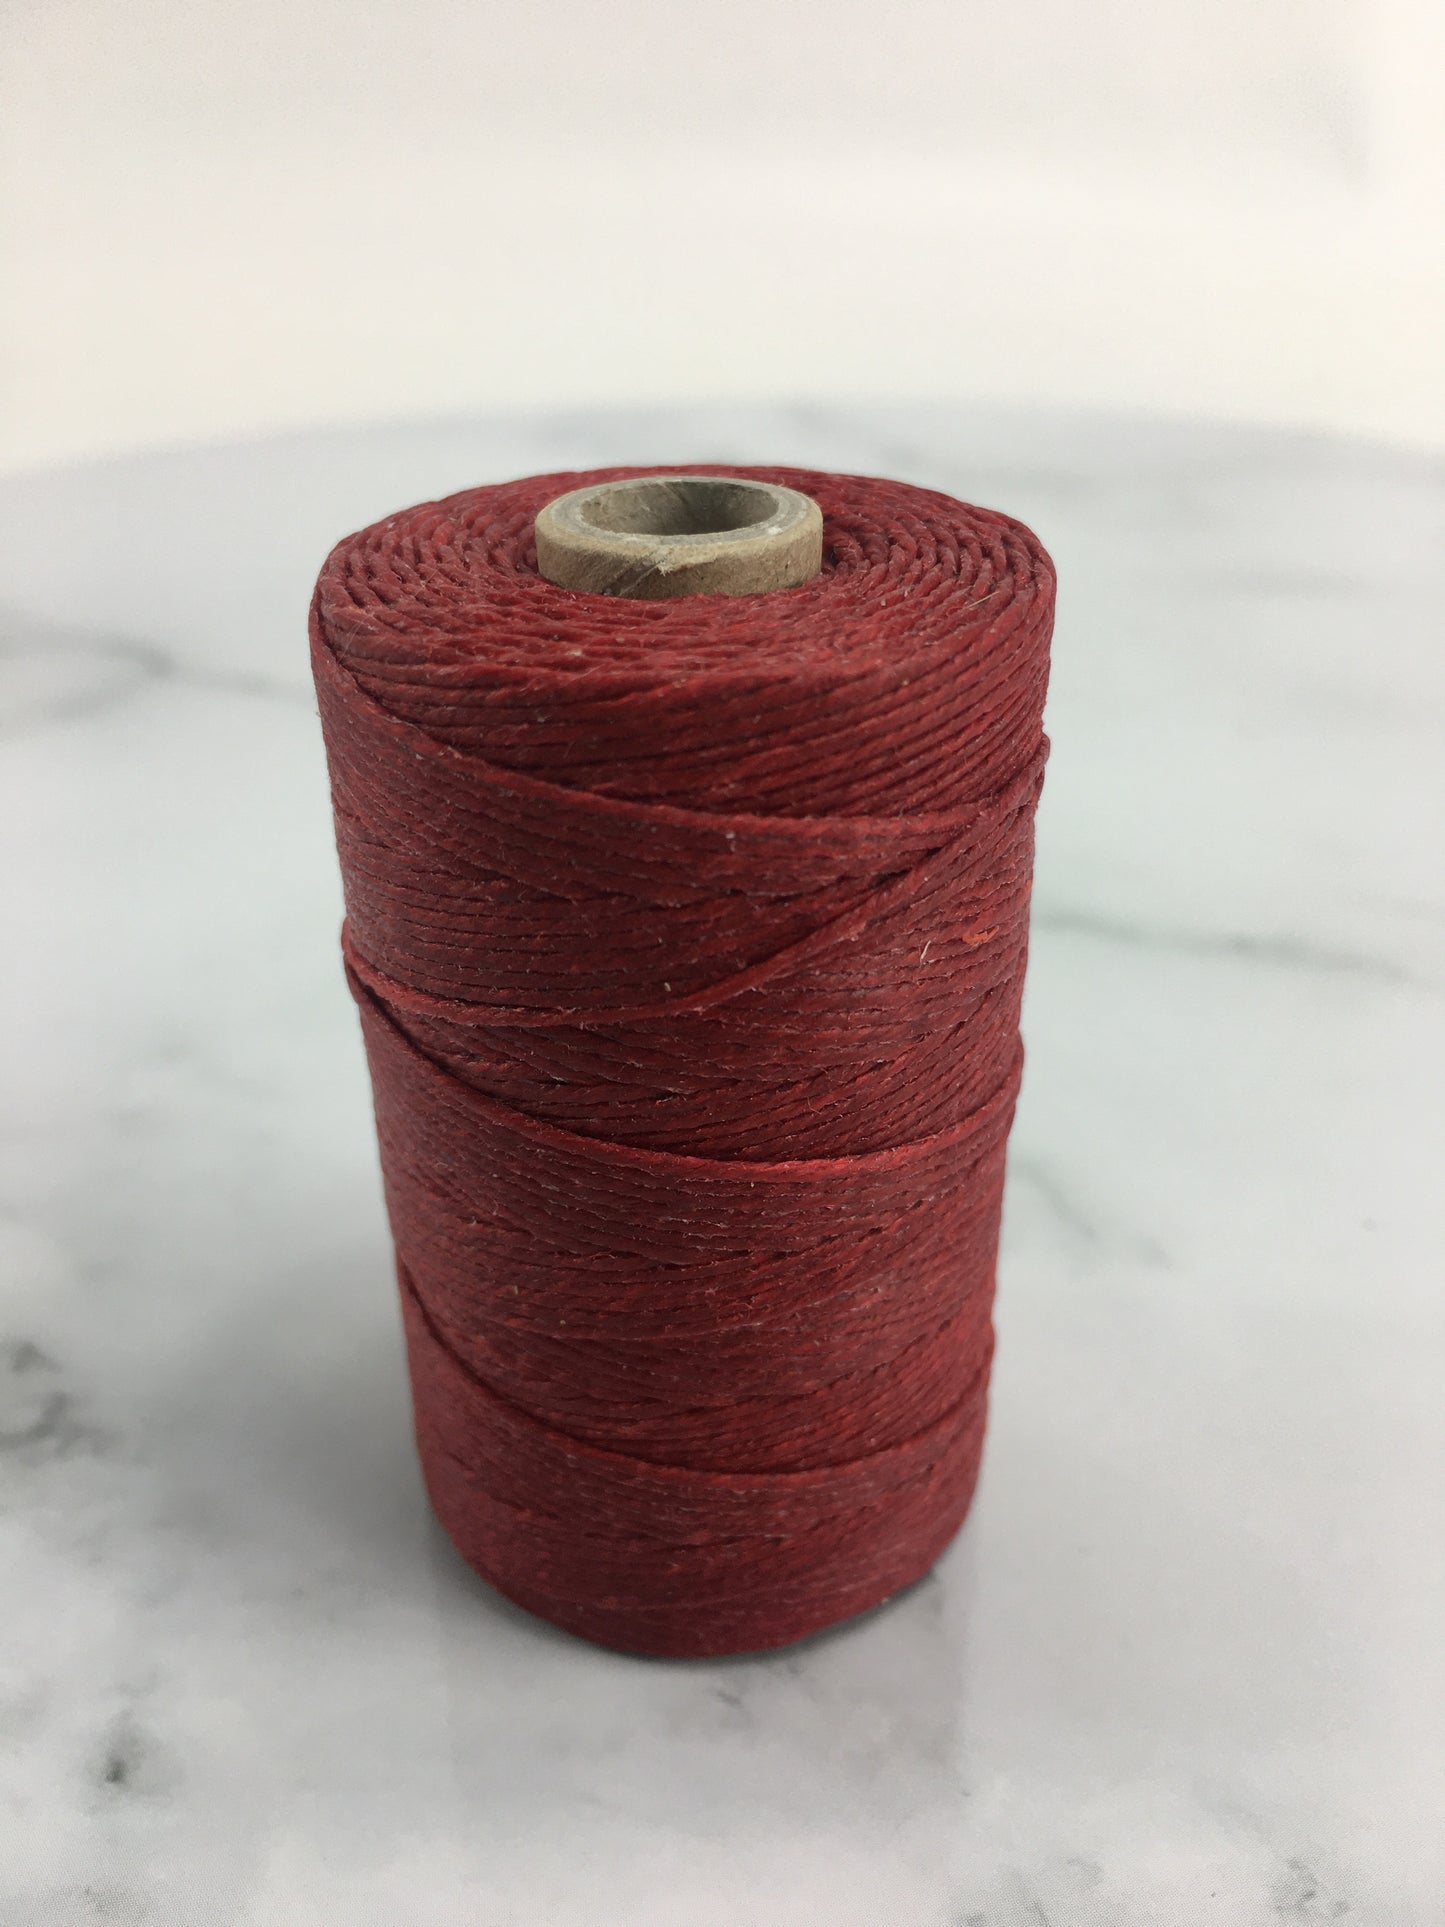 Royal Red- Per spool 50g- 100% Pure Linen Thread- Waxed- 18/4 No.18 Cord 4- Approx 1mm thick